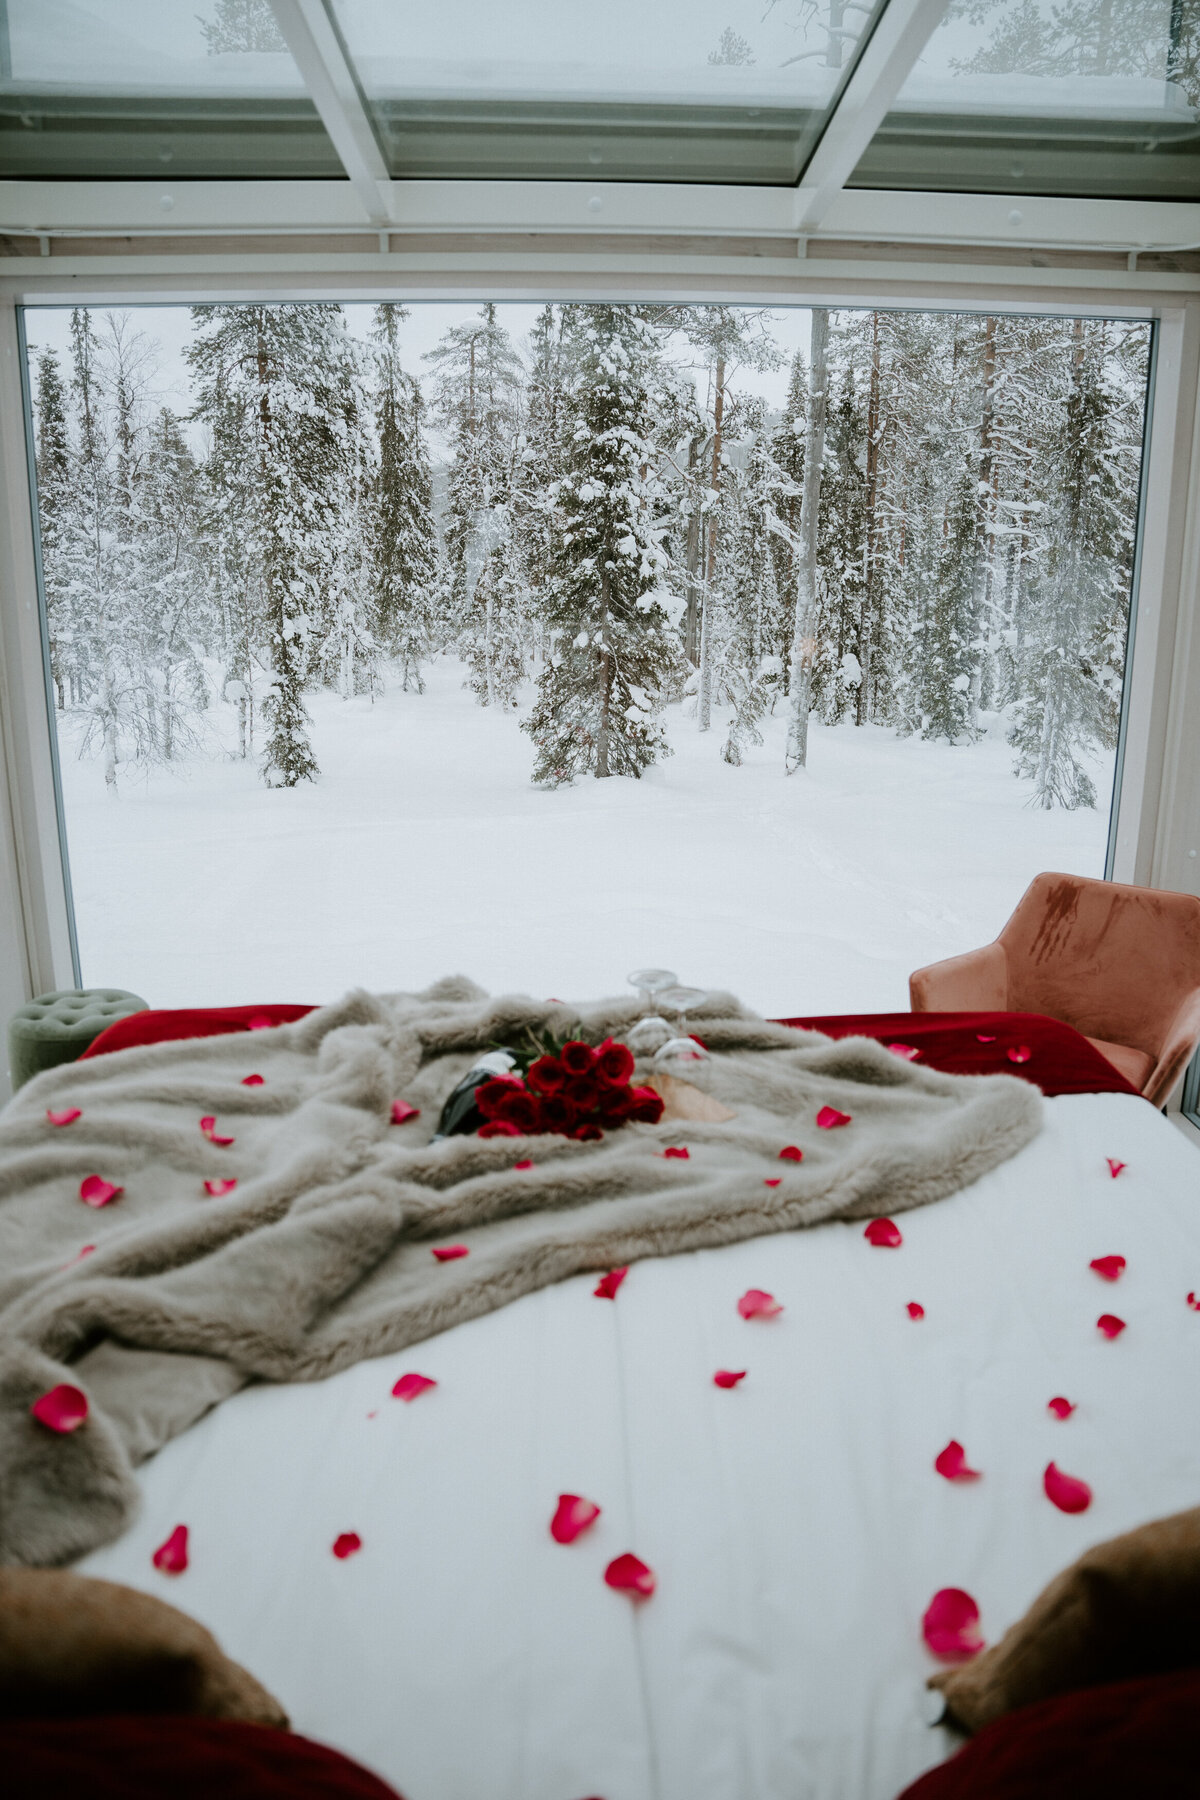 Proposal bed ready with roses, wine, view of the snow in the trees